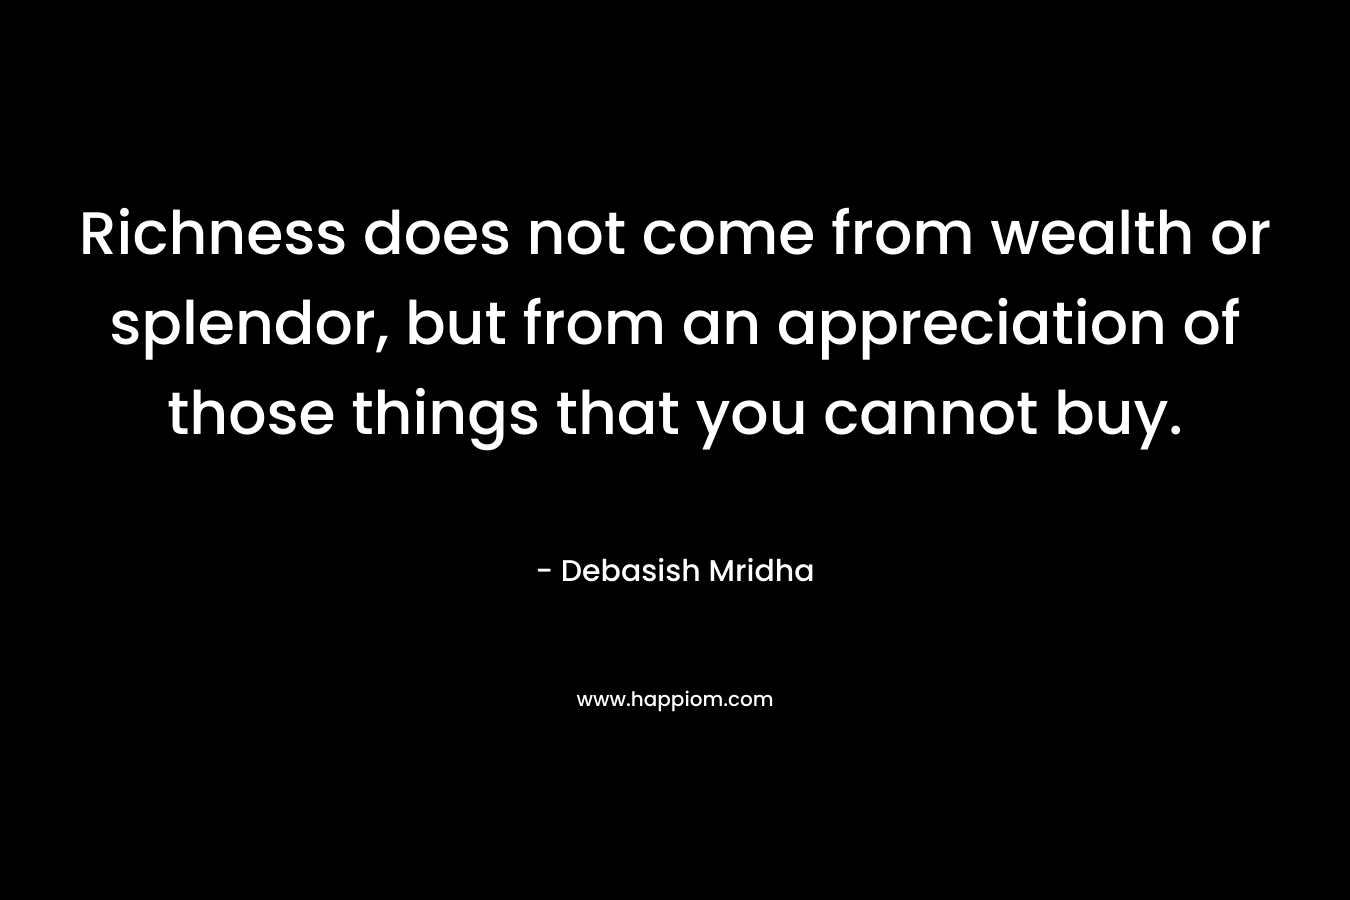 Richness does not come from wealth or splendor, but from an appreciation of those things that you cannot buy. – Debasish Mridha